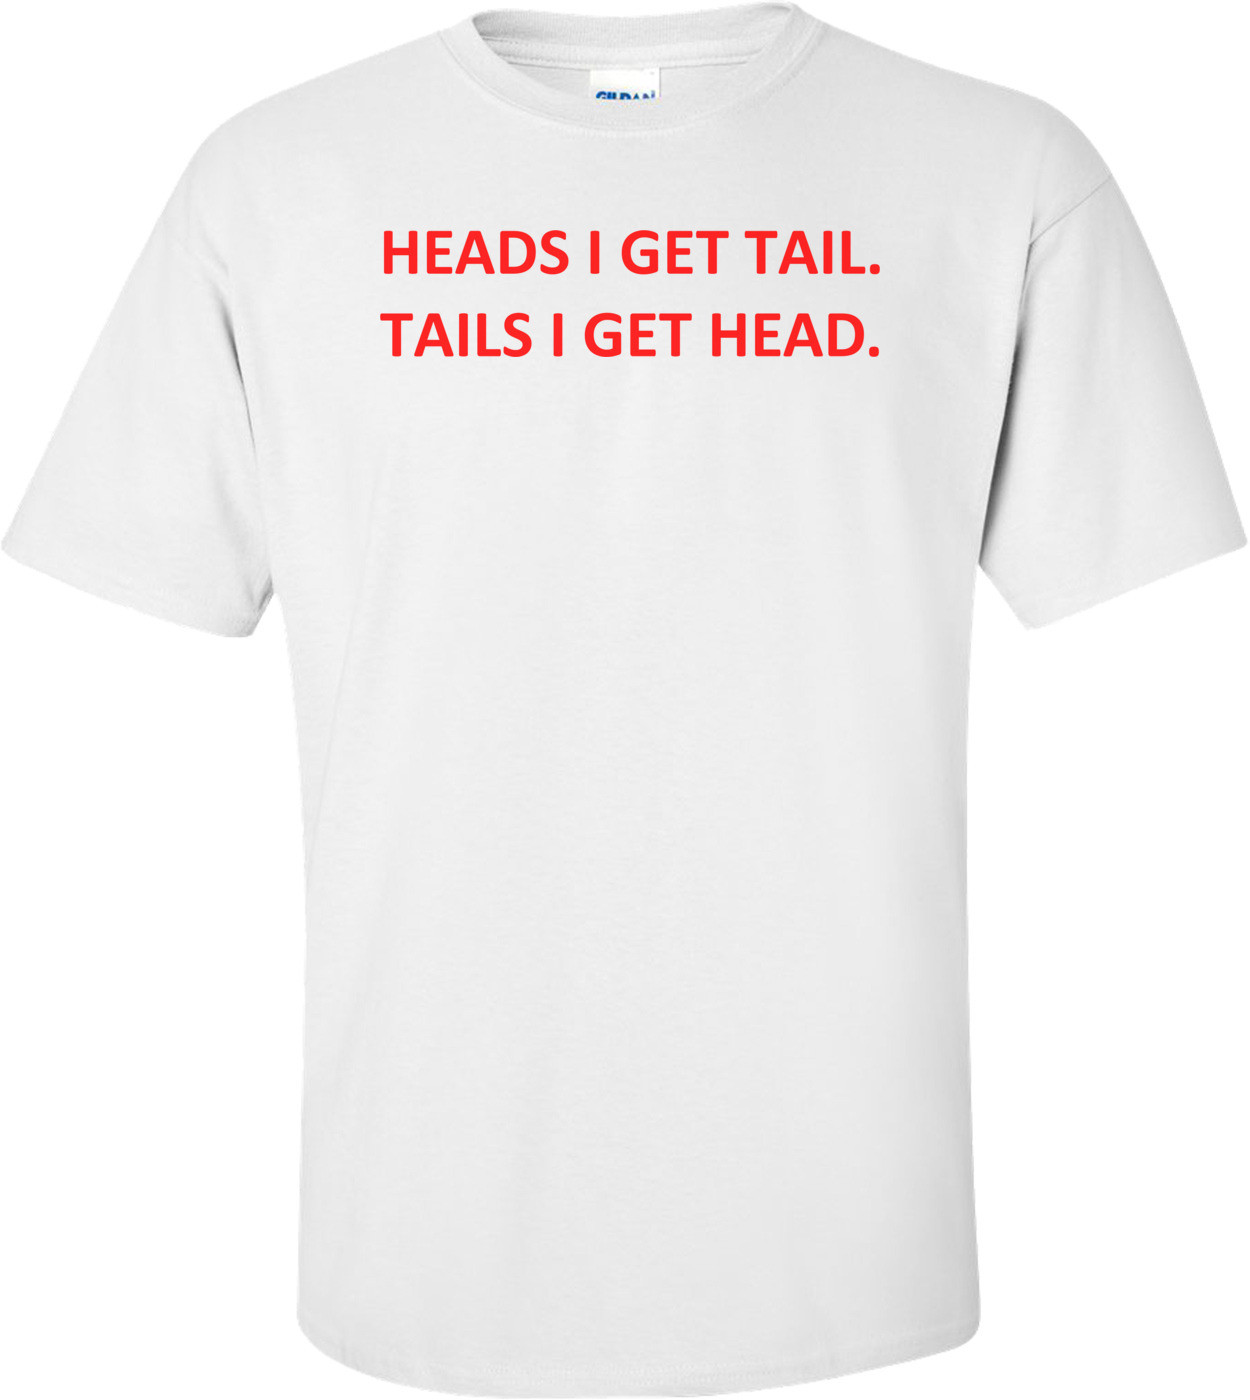 HEADS I GET TAIL. TAILS I GET HEAD.